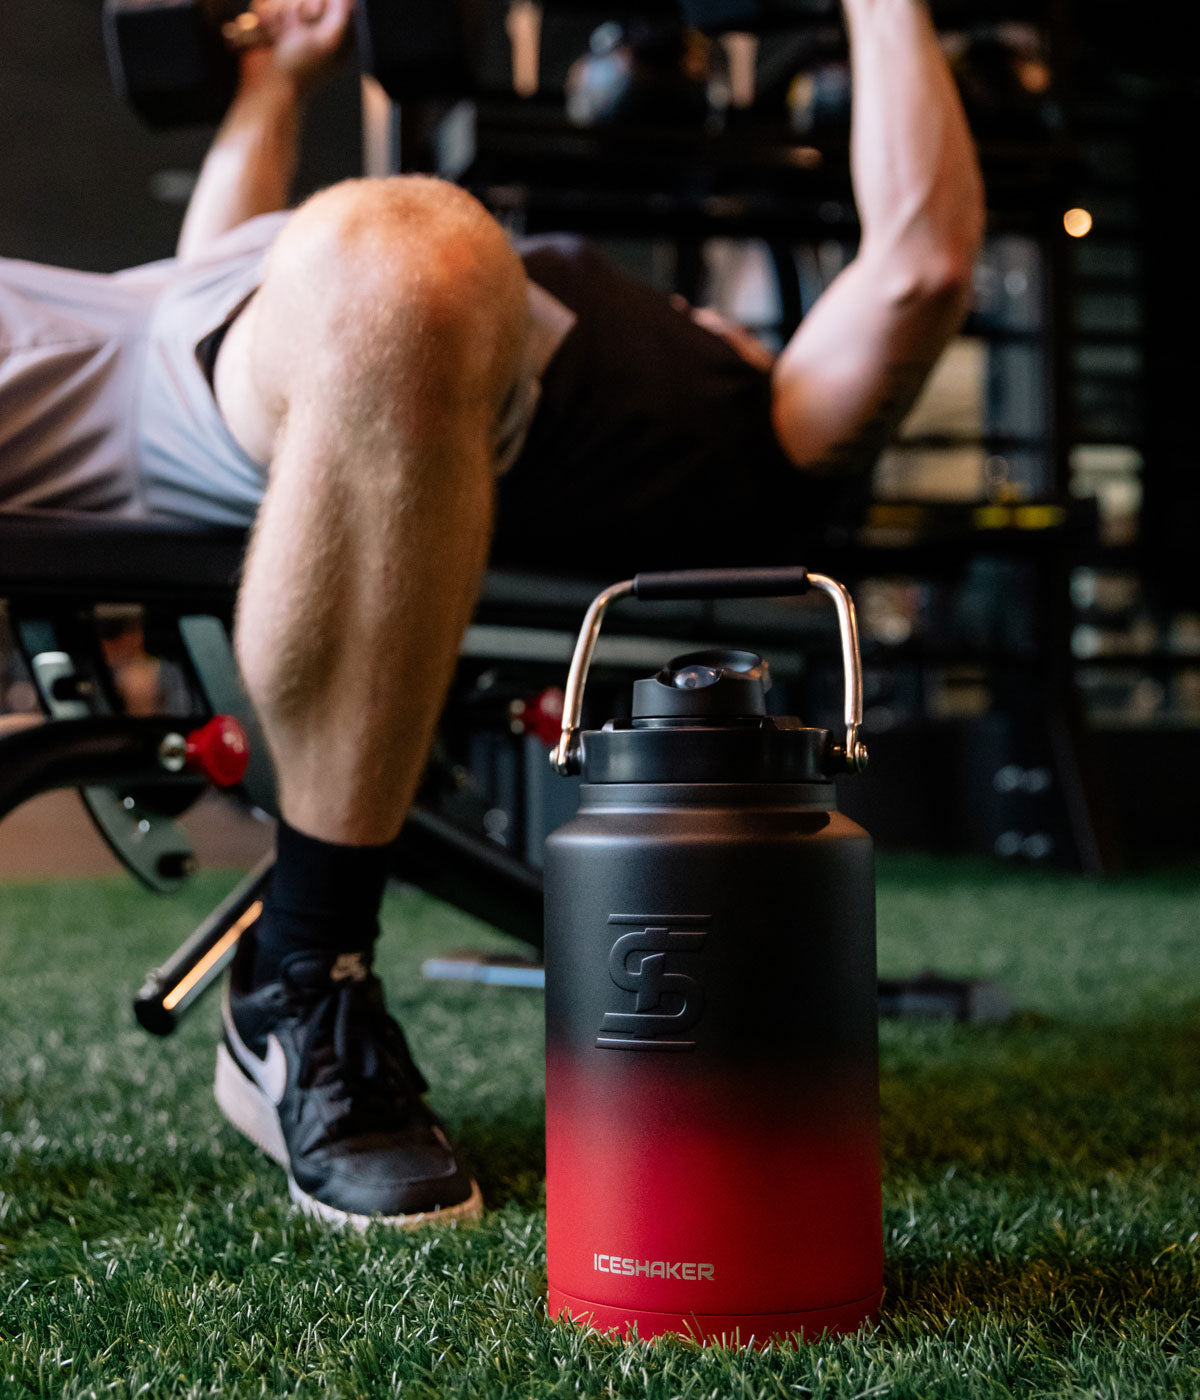 An image of a Red Black Ombre One Gallon Jug sitting on green turf inside a gym. In the background, a man is lifting weights.